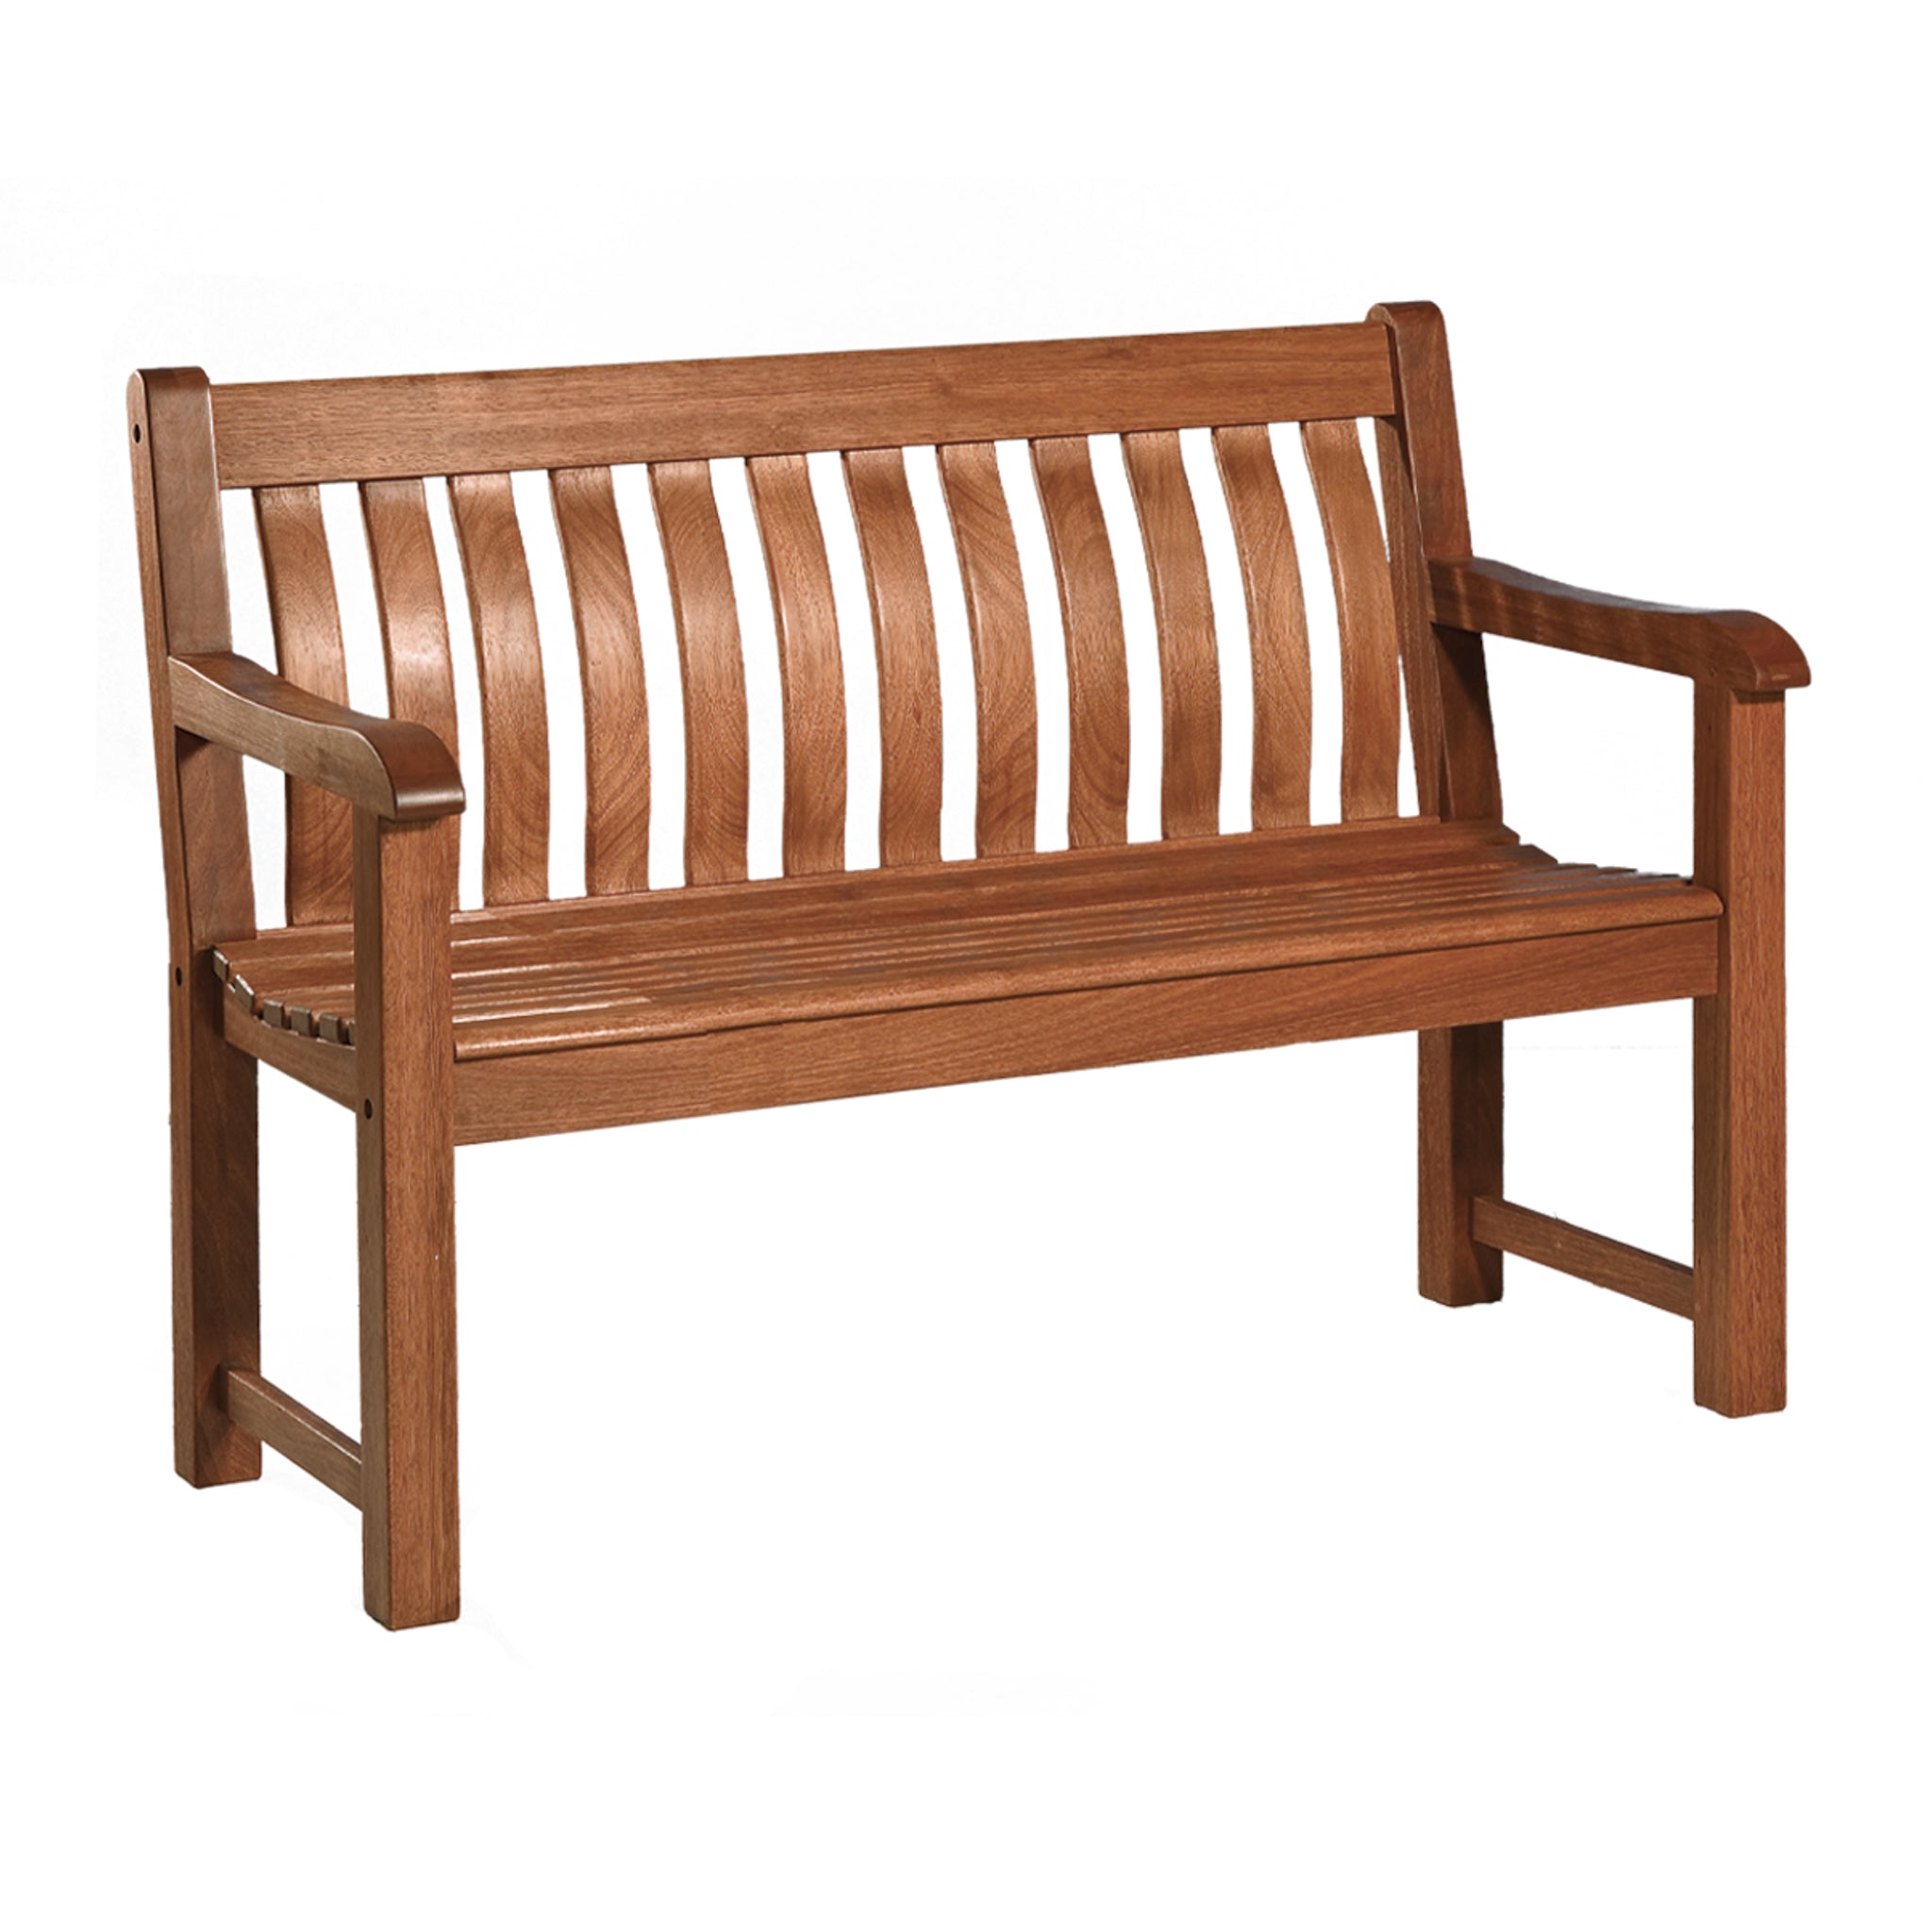 Cornis St George Bench - 4ft